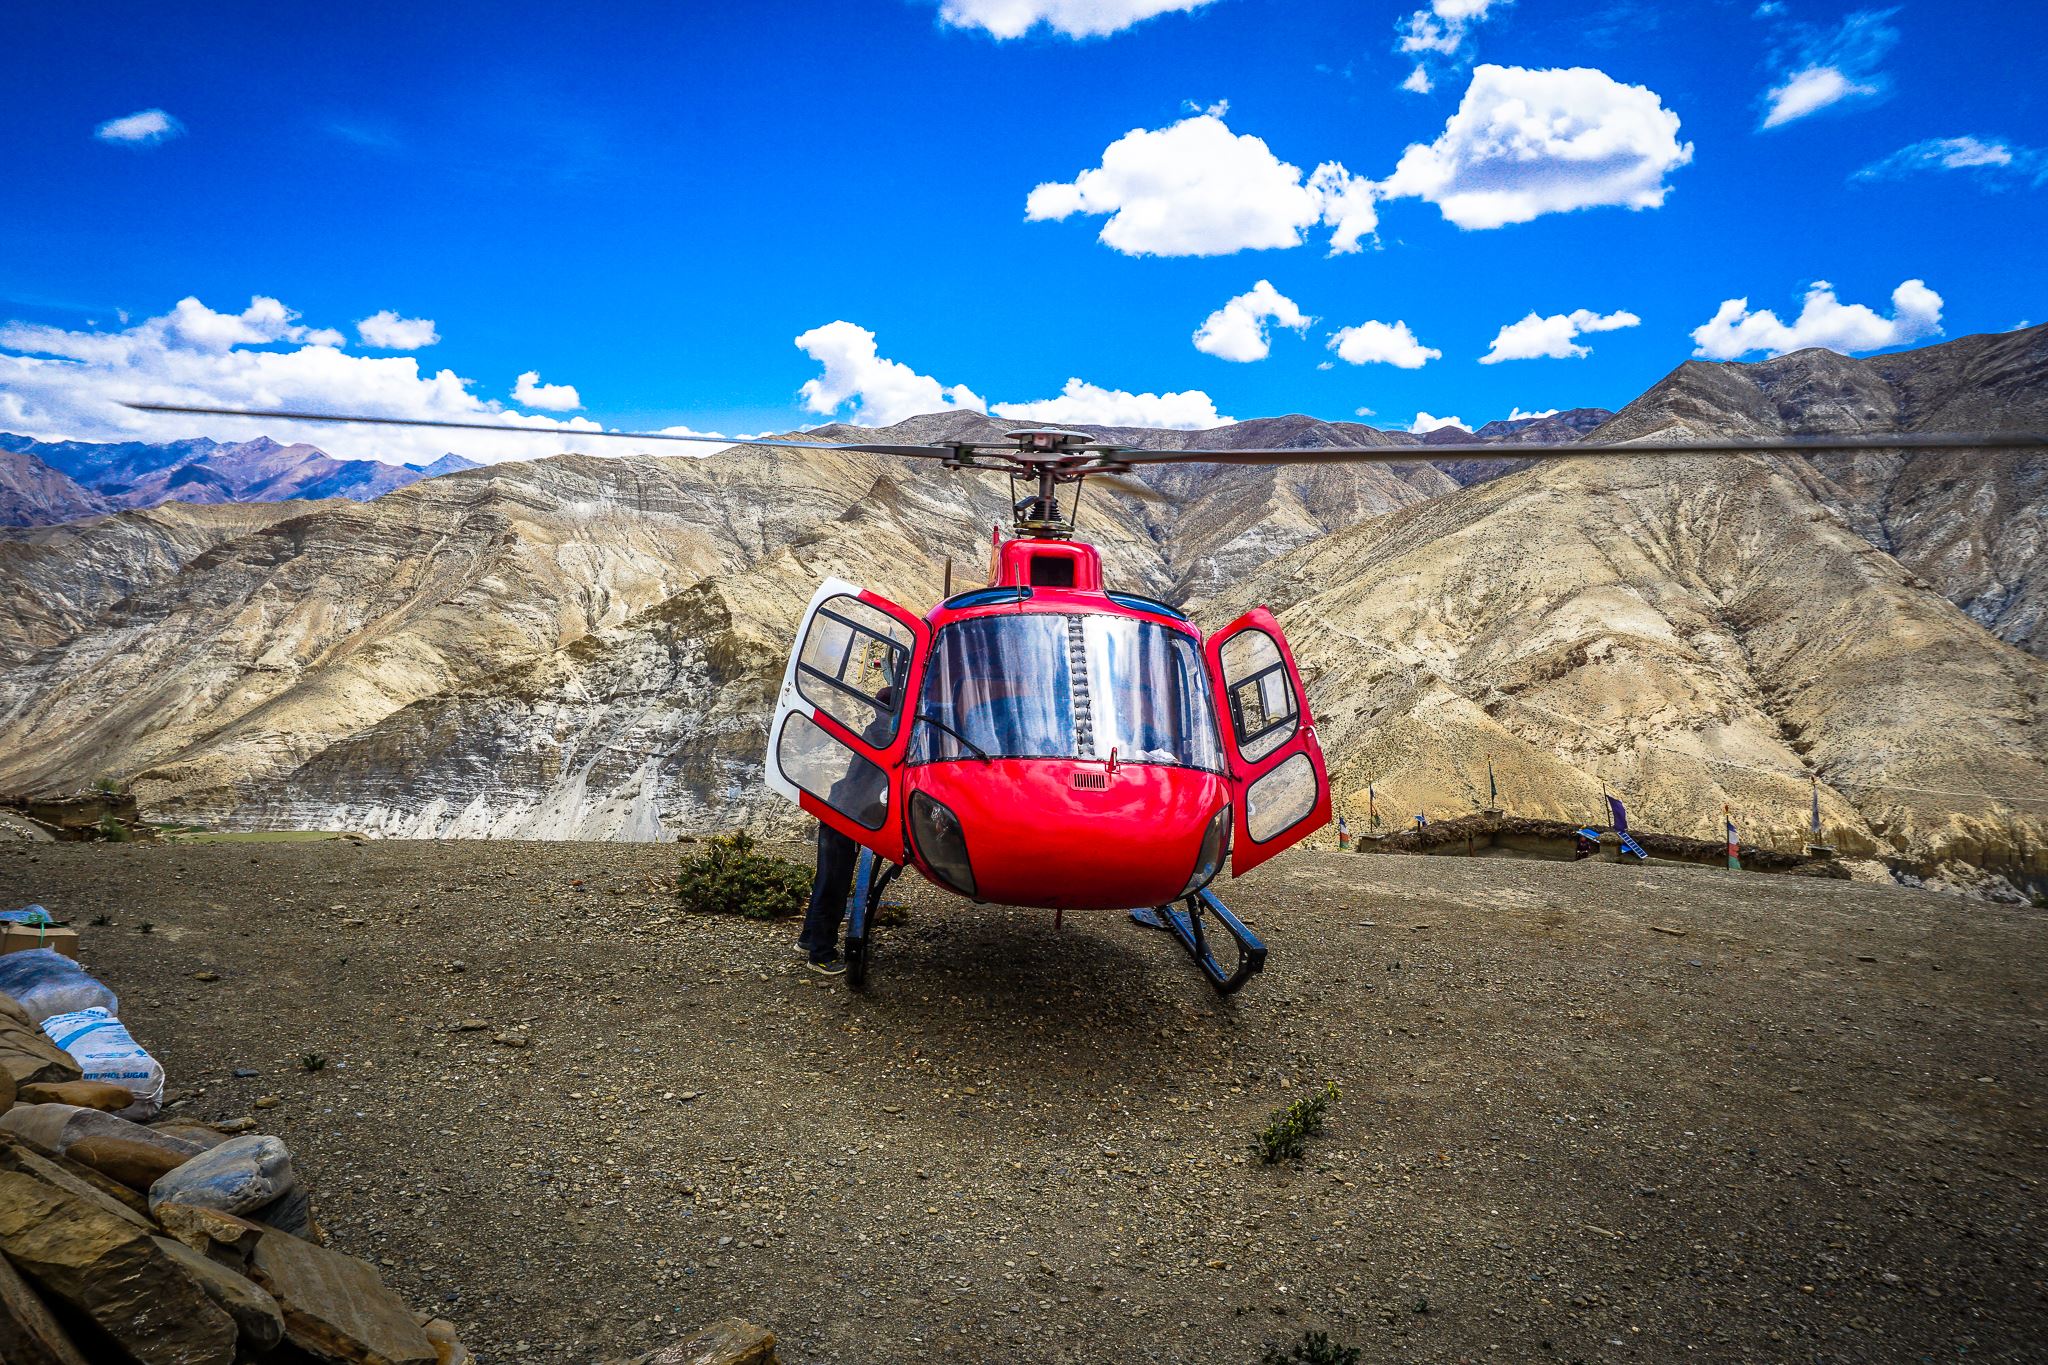 Jomsom By Helicopter